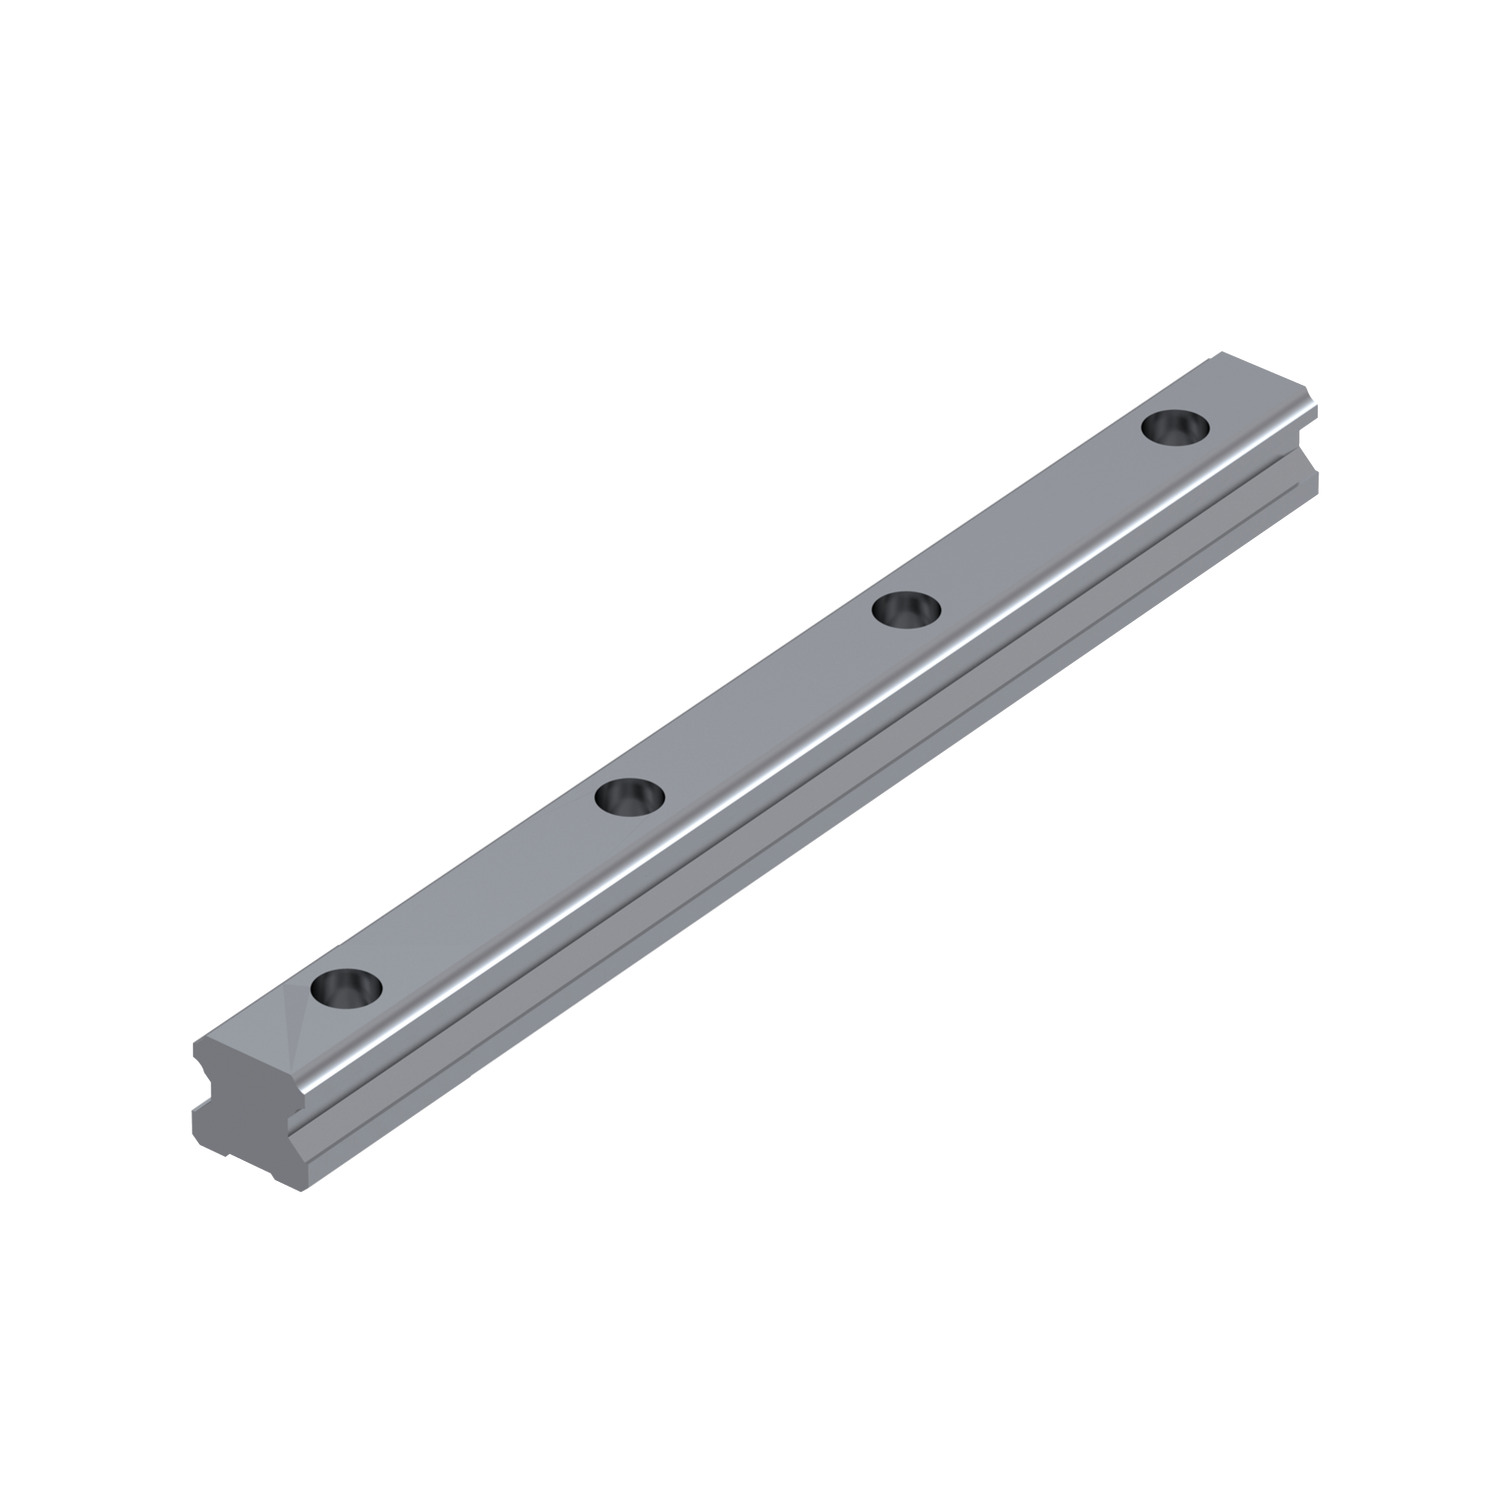 L1016.15-0340 Linear guide rail 15mm 340 Hardened and ground steel. EC:20162504 WG:05063055288644